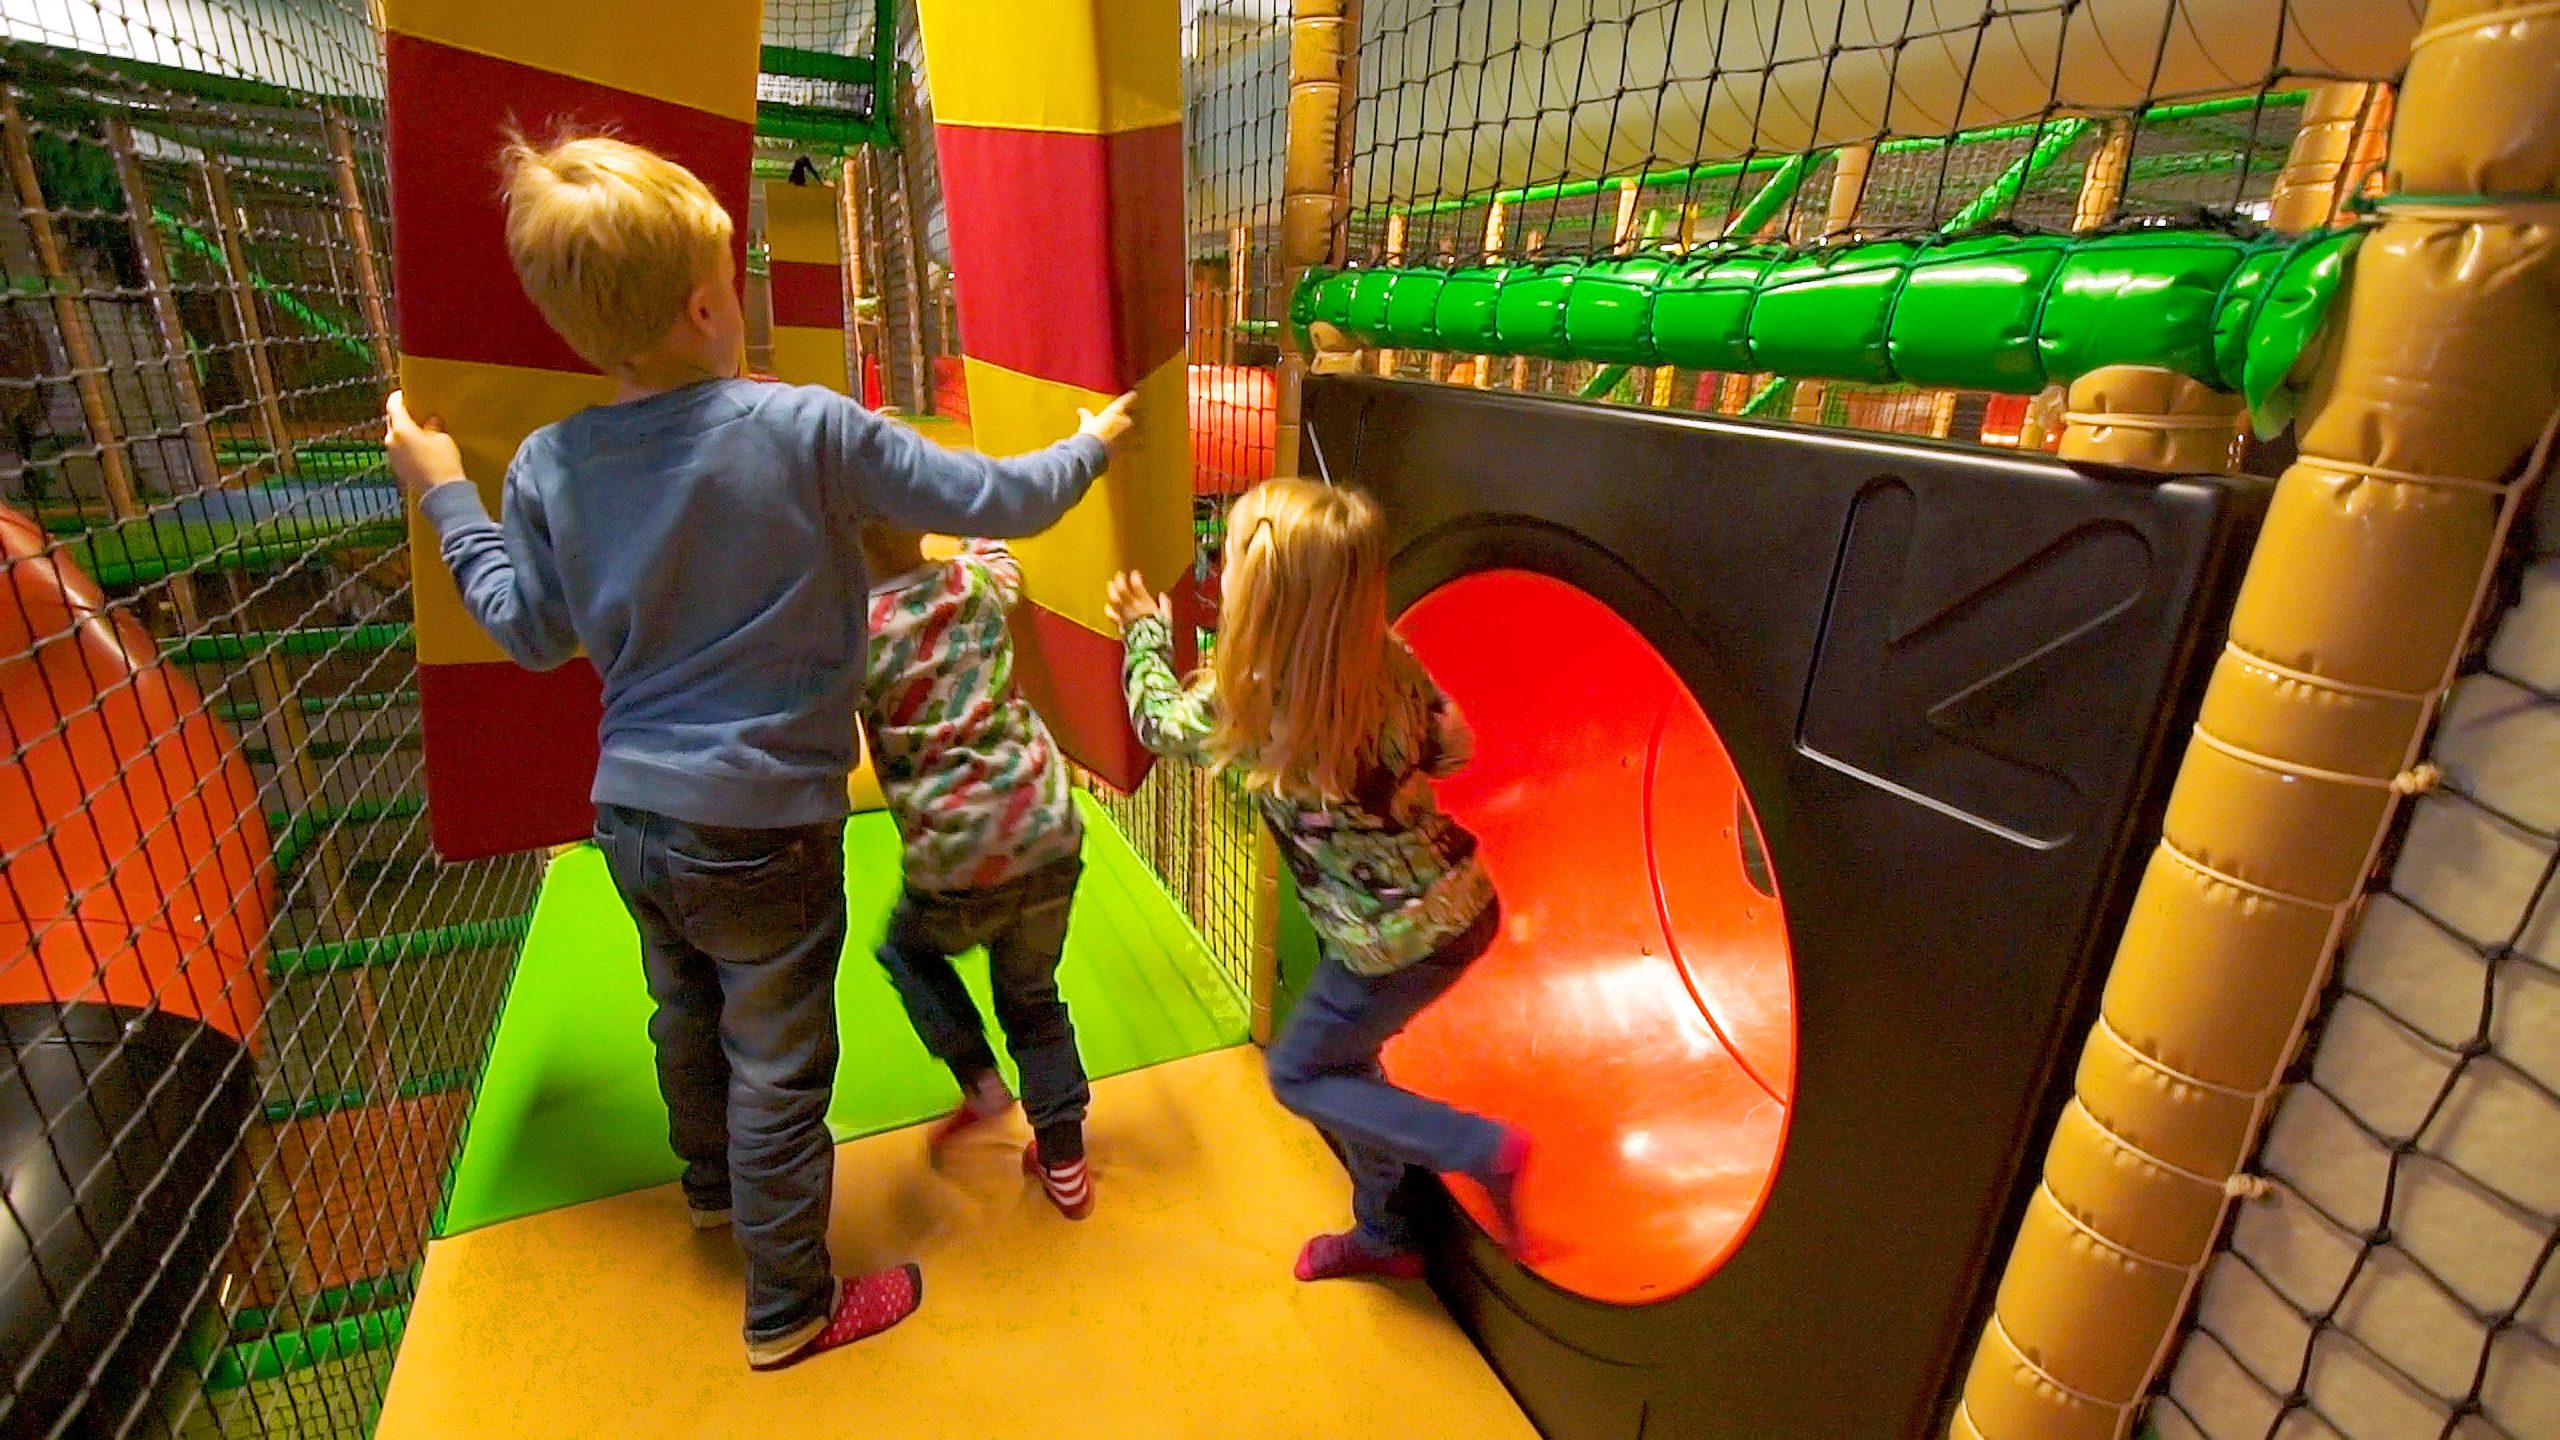 Rainy Day in Highland: Indoor Family Entertainment Options